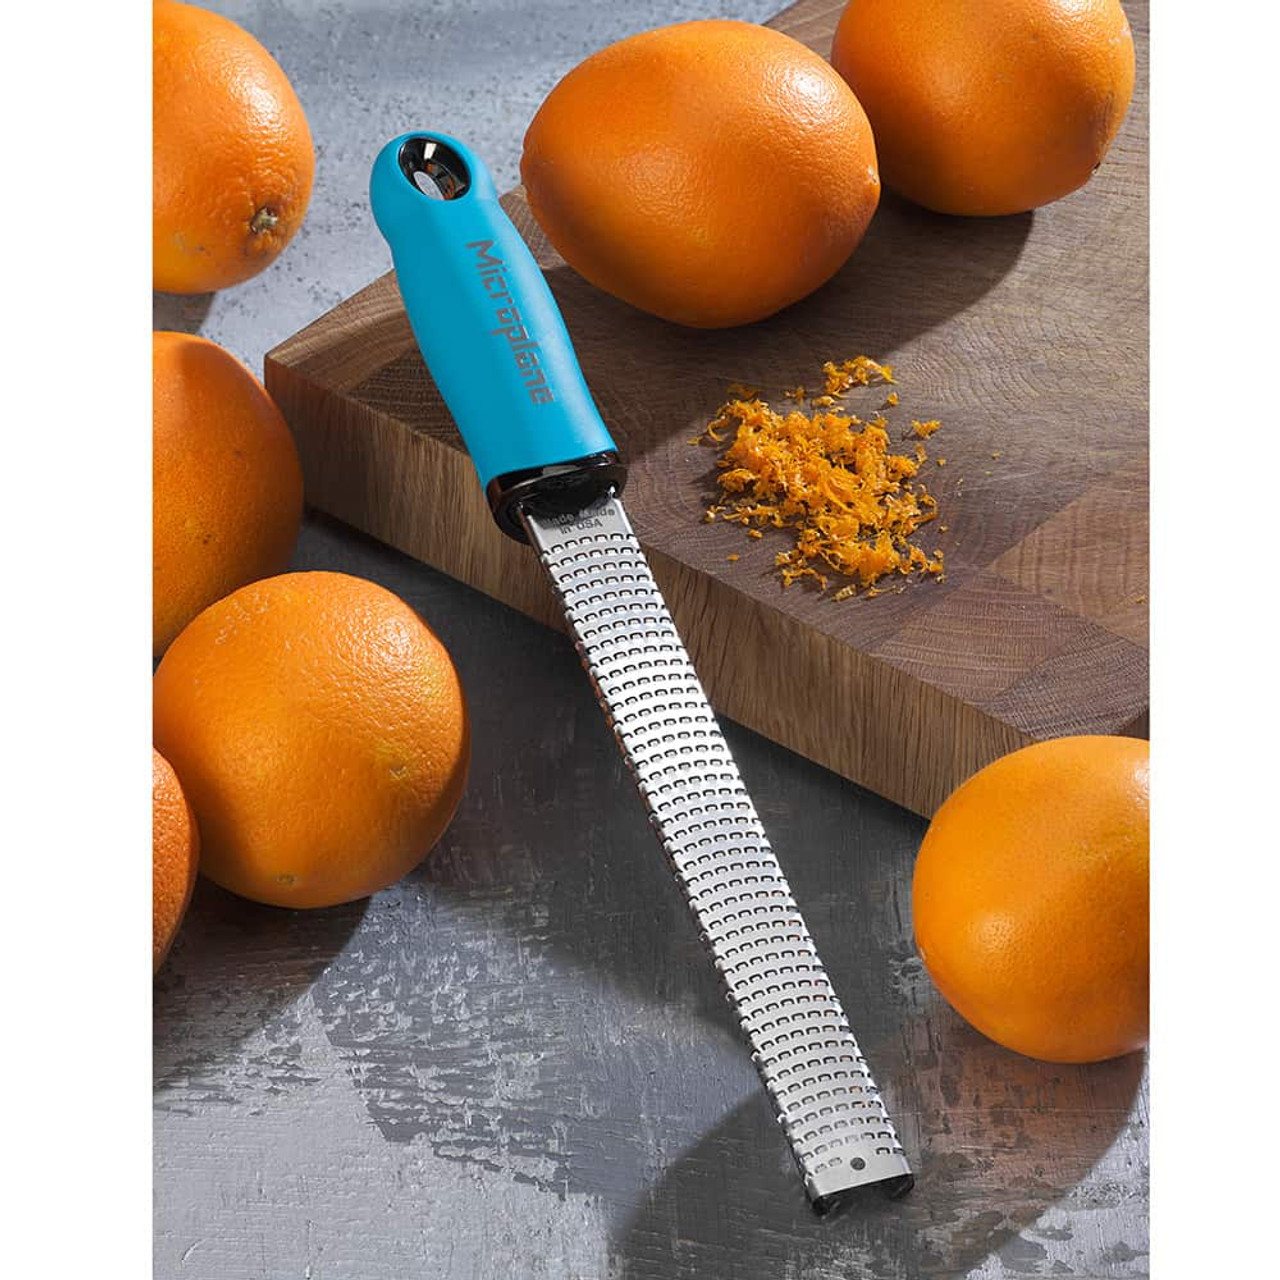 https://cdn11.bigcommerce.com/s-hccytny0od/images/stencil/1280x1280/products/1211/2862/microplane-premium-classic-series-zester-grater-3__21610.1595340347.jpg?c=2?imbypass=on